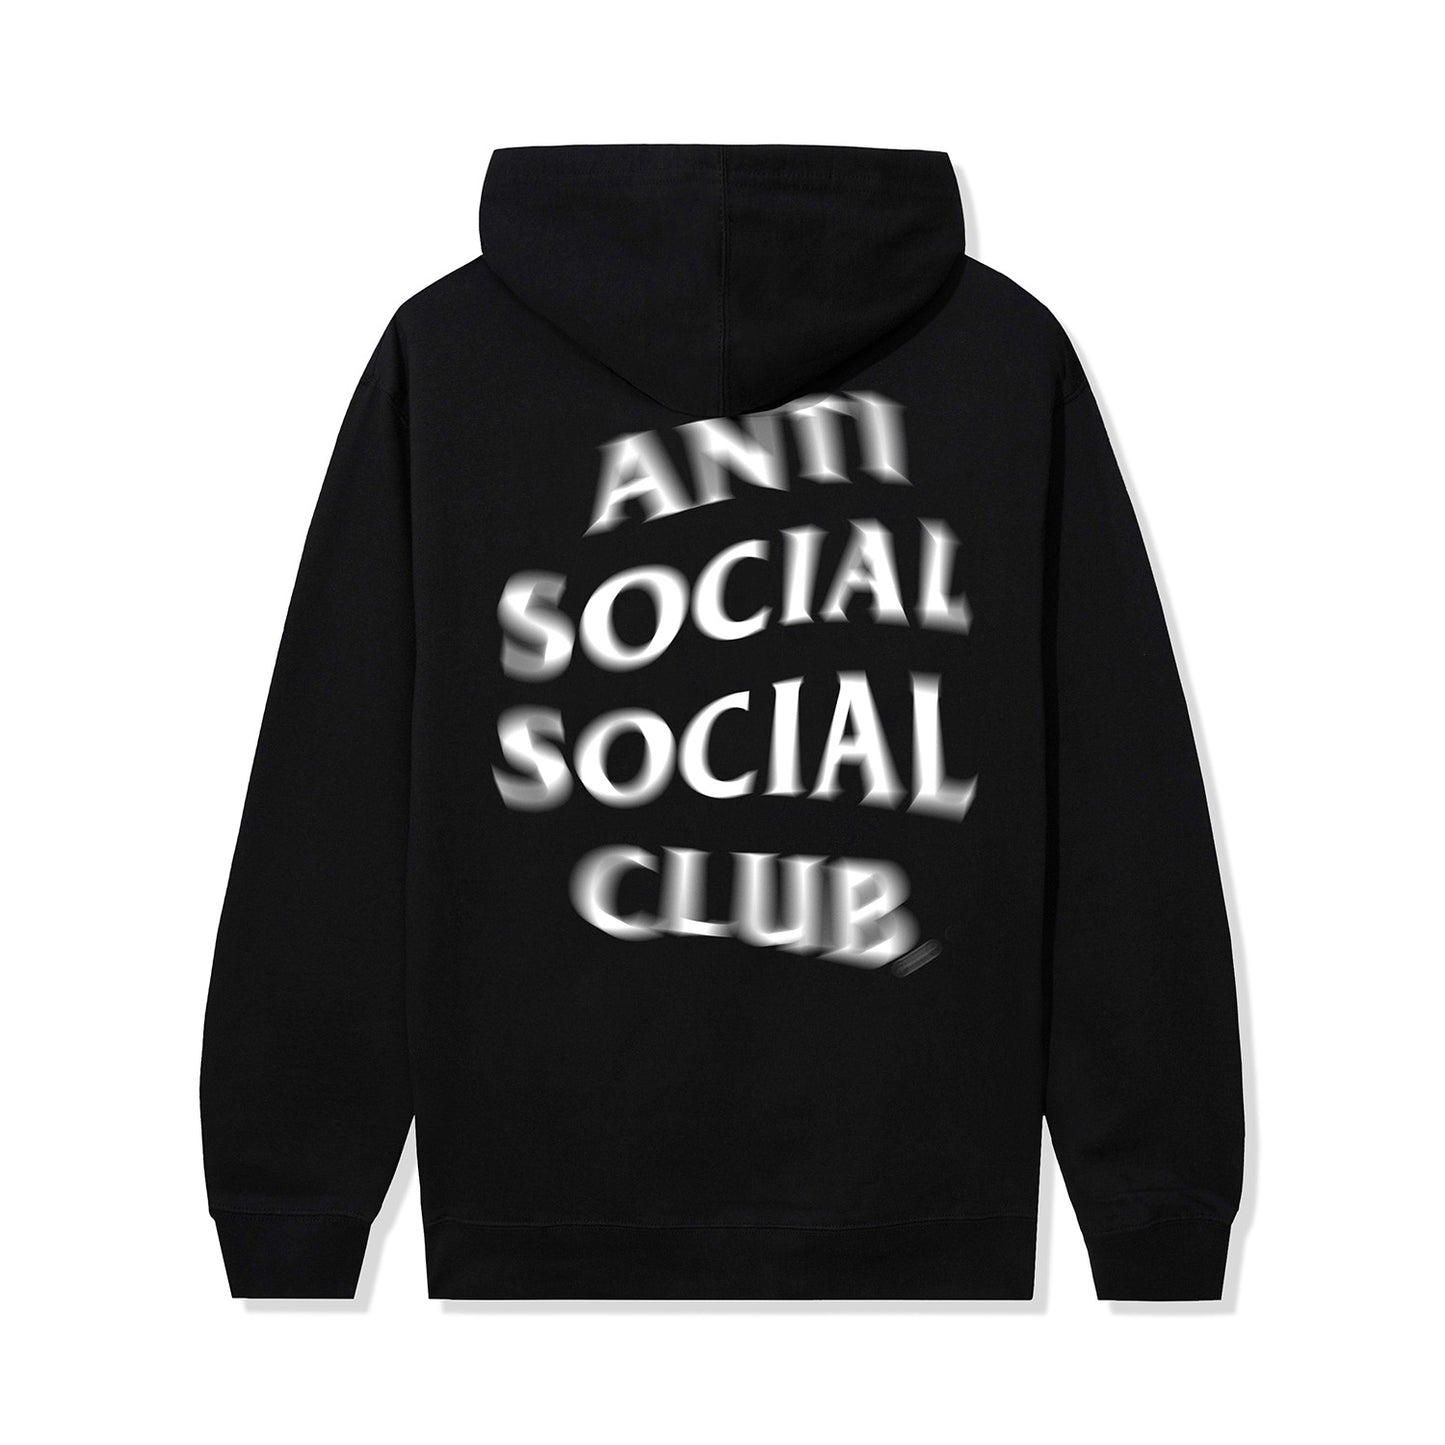 Don't Mind Me Hoodie – AntiSocialSocialClub